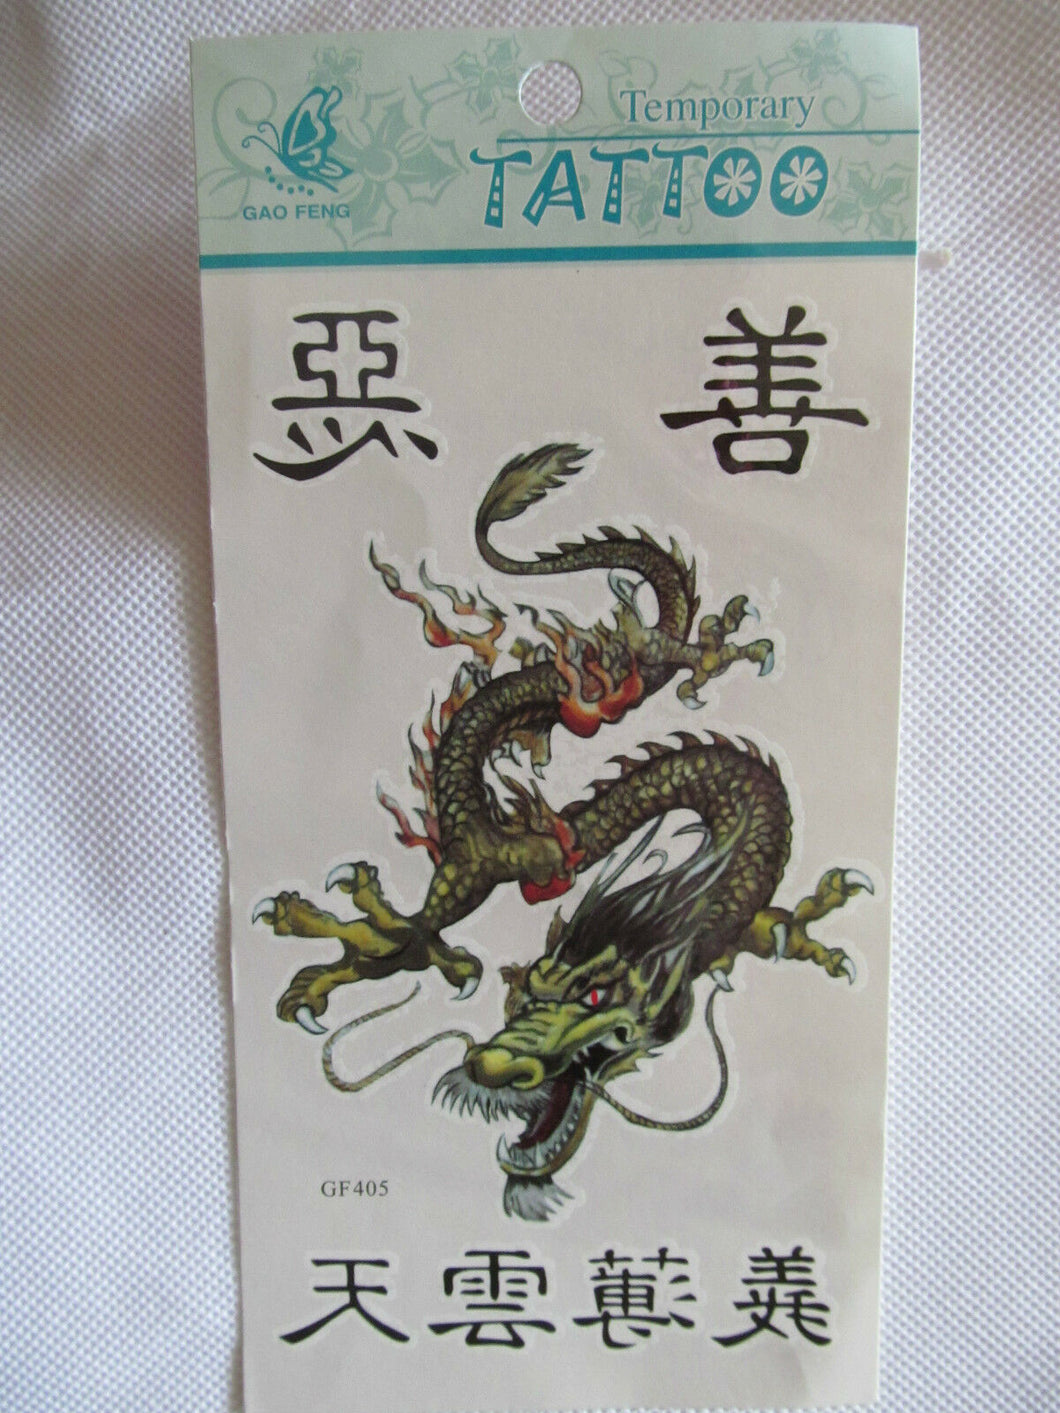 1x SHEET QUALITY MENS BOYS ANGRY CHINESE DRAGON TEMPORARY TATTOOS PARTIES UKSELL